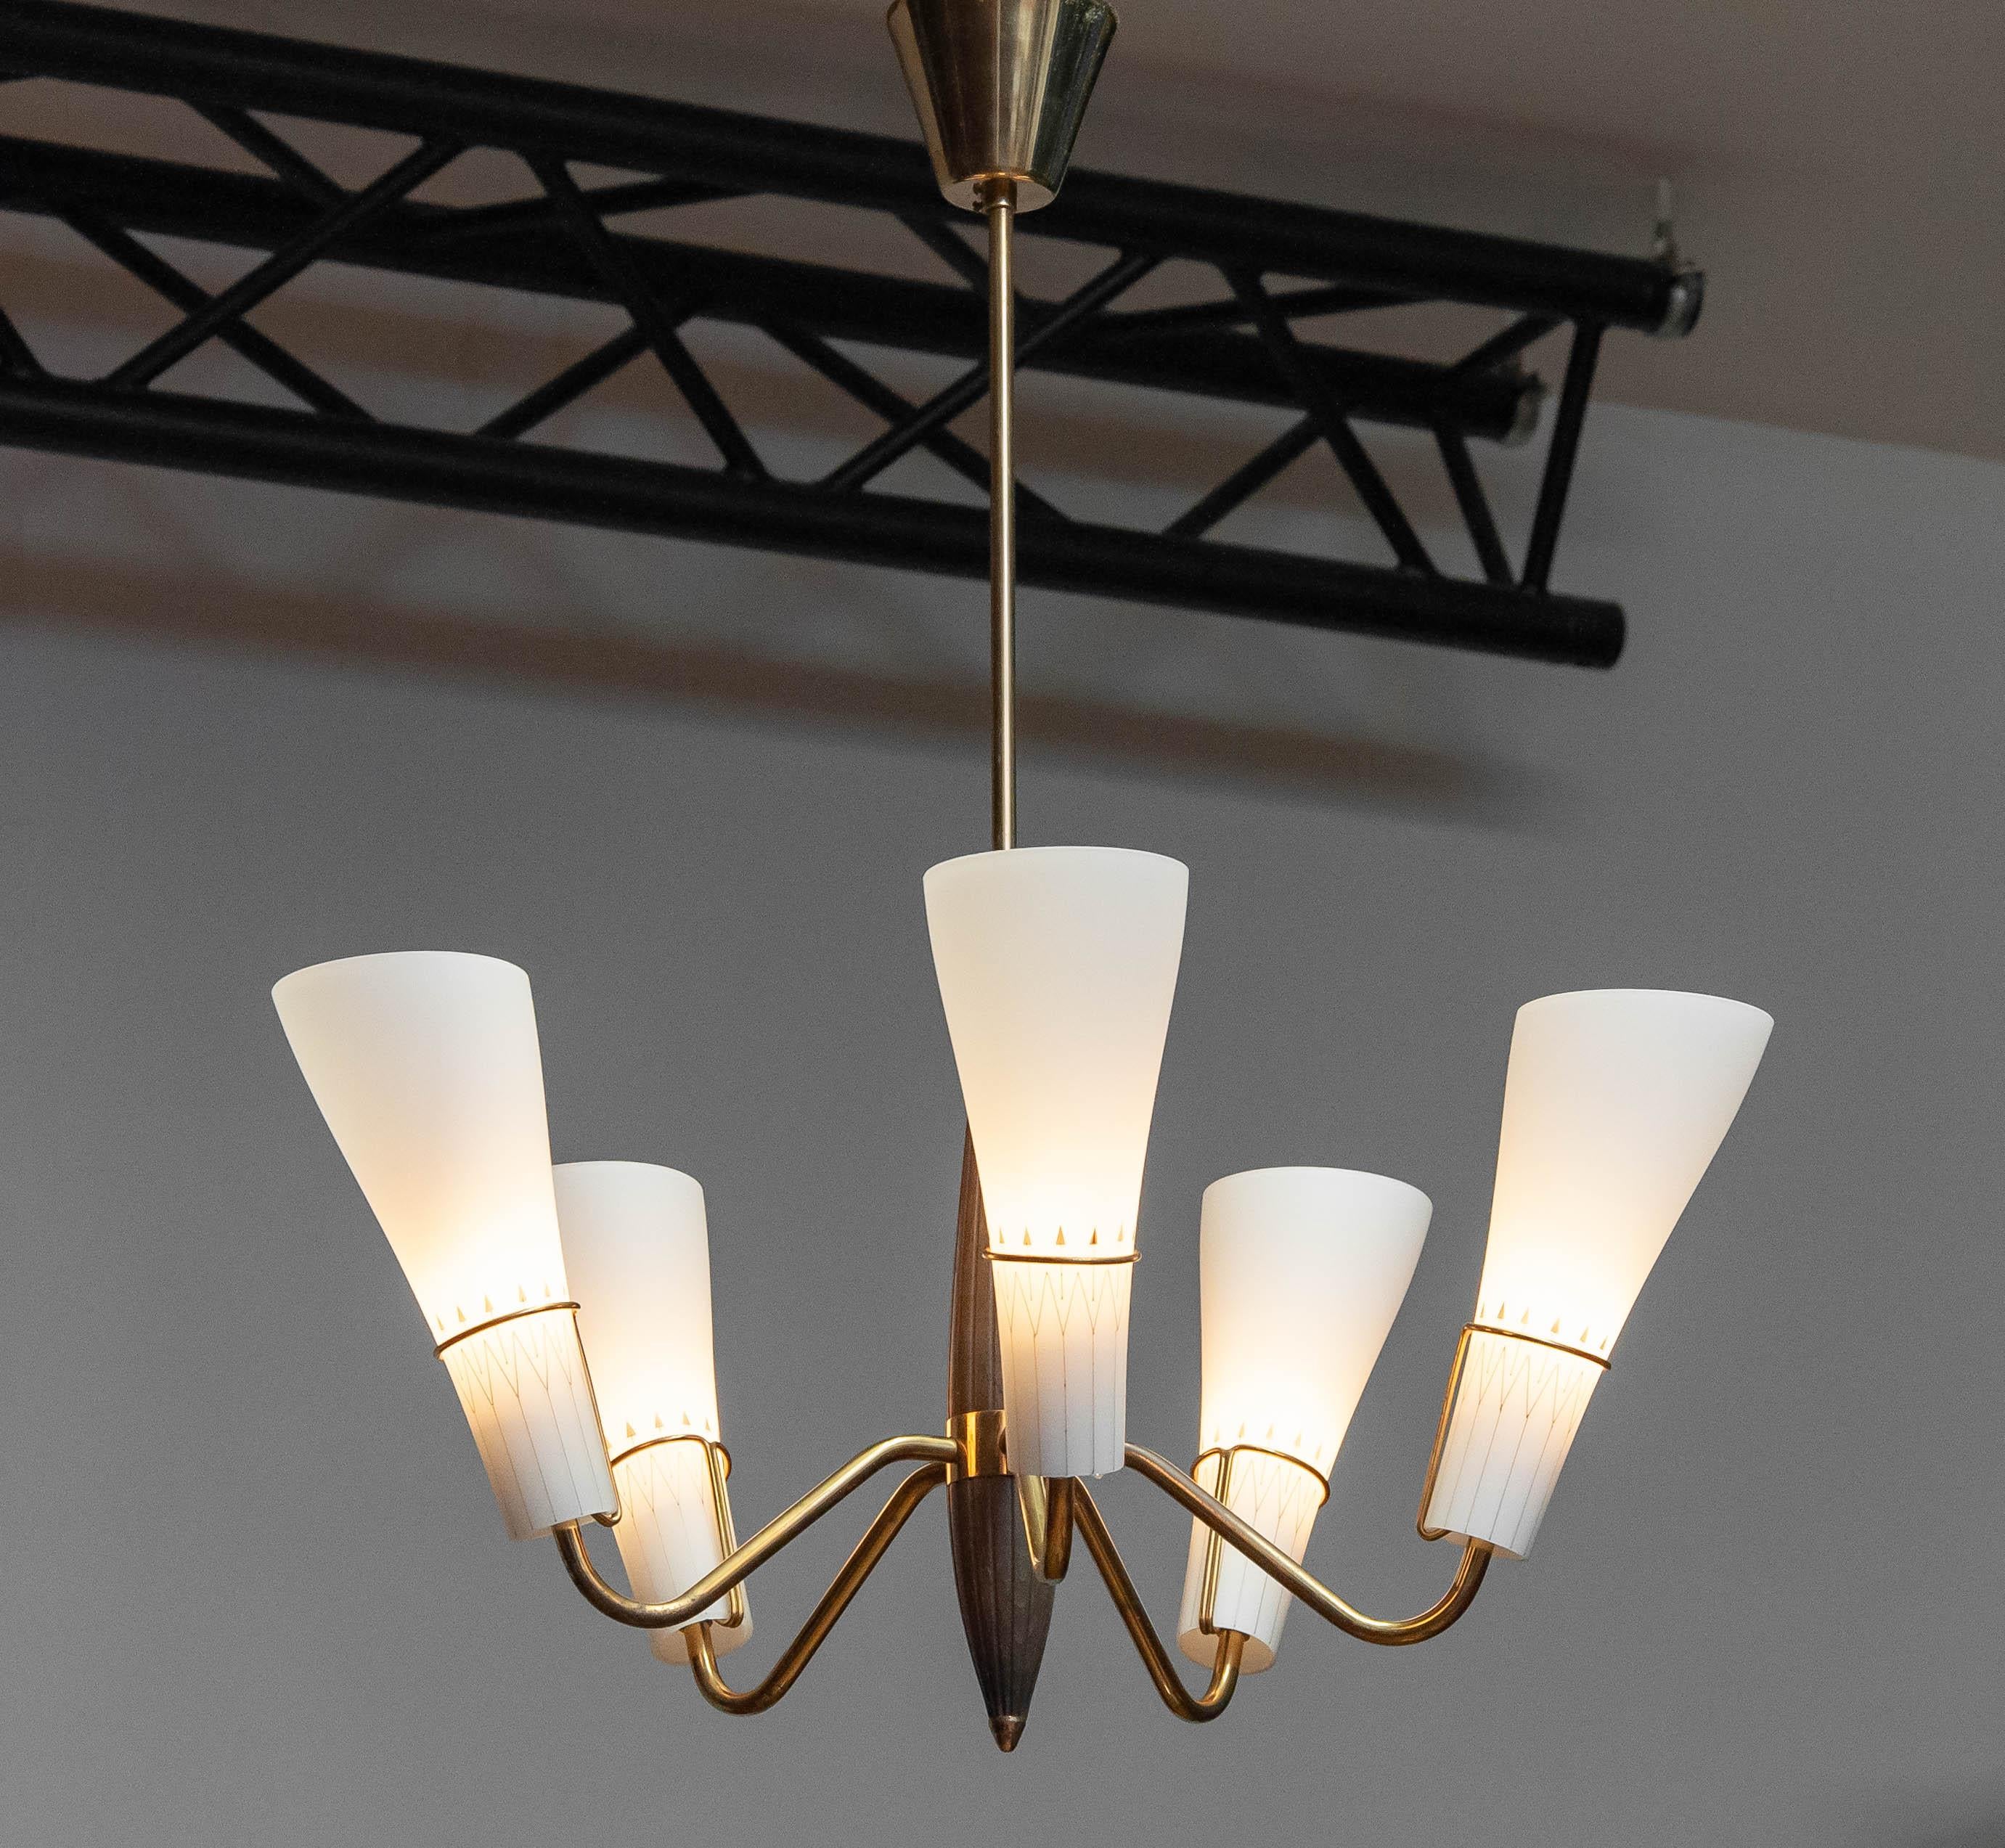 Mid-Century Modern 1950s Swedish Brass With Beech Five Arm Chandelier With Frosted Art Glass Shades For Sale